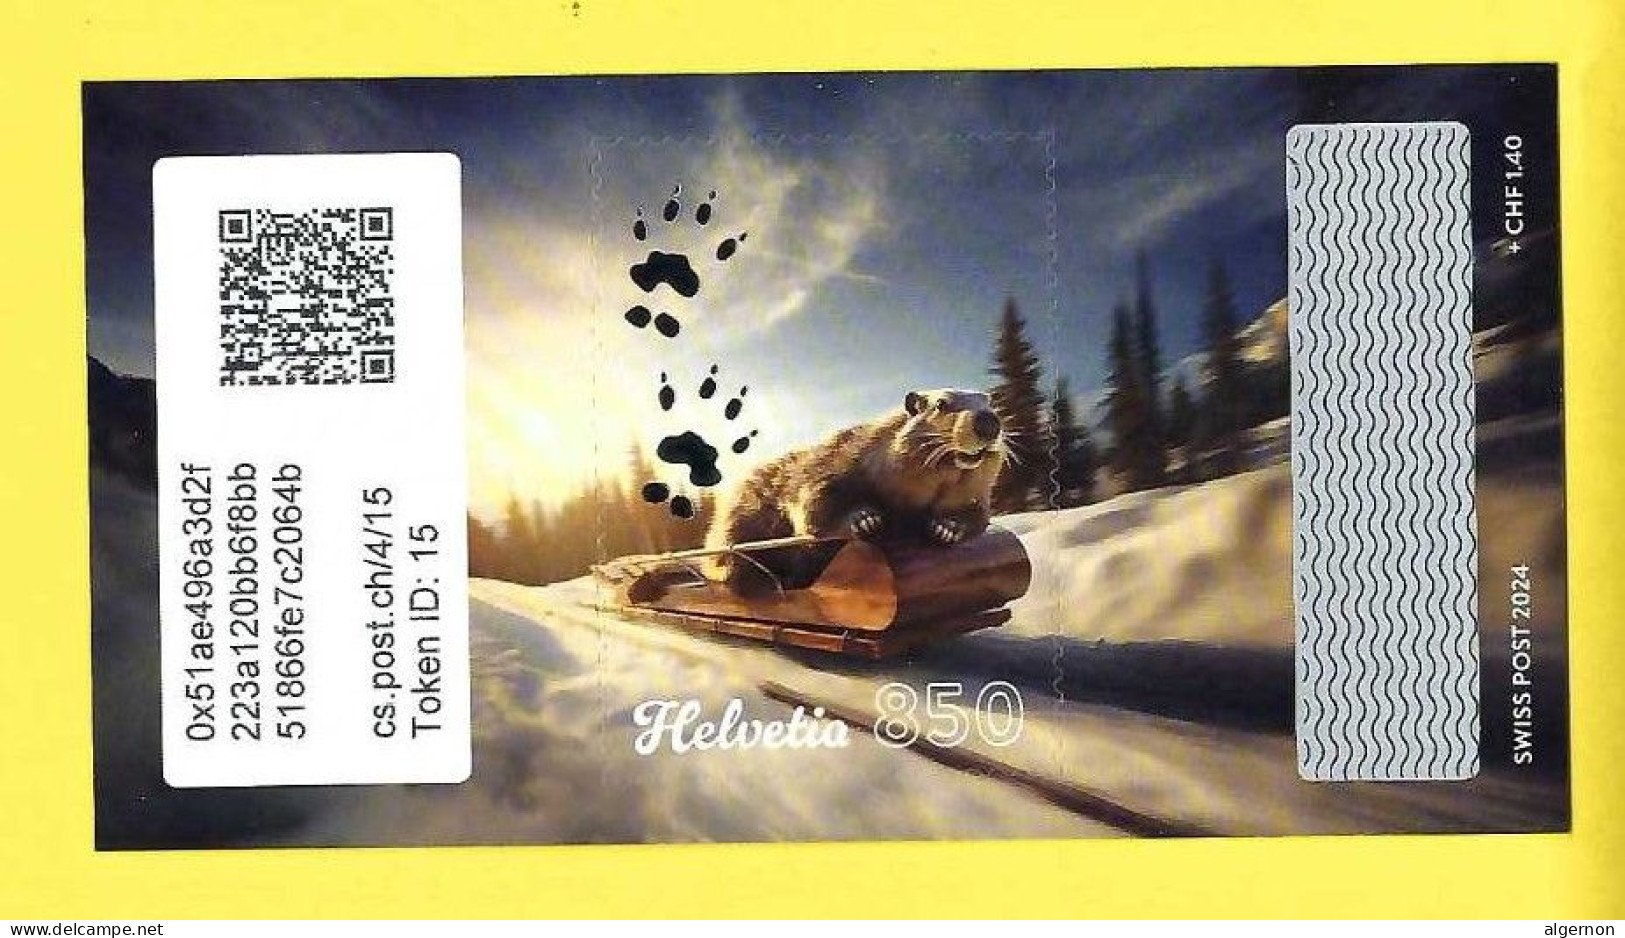 2024 Swiss Crypto Stamp 4.0 - ID 15  ** Marmotte Sledging Luge Tirage 7500 Exemplaires ! - Neufs